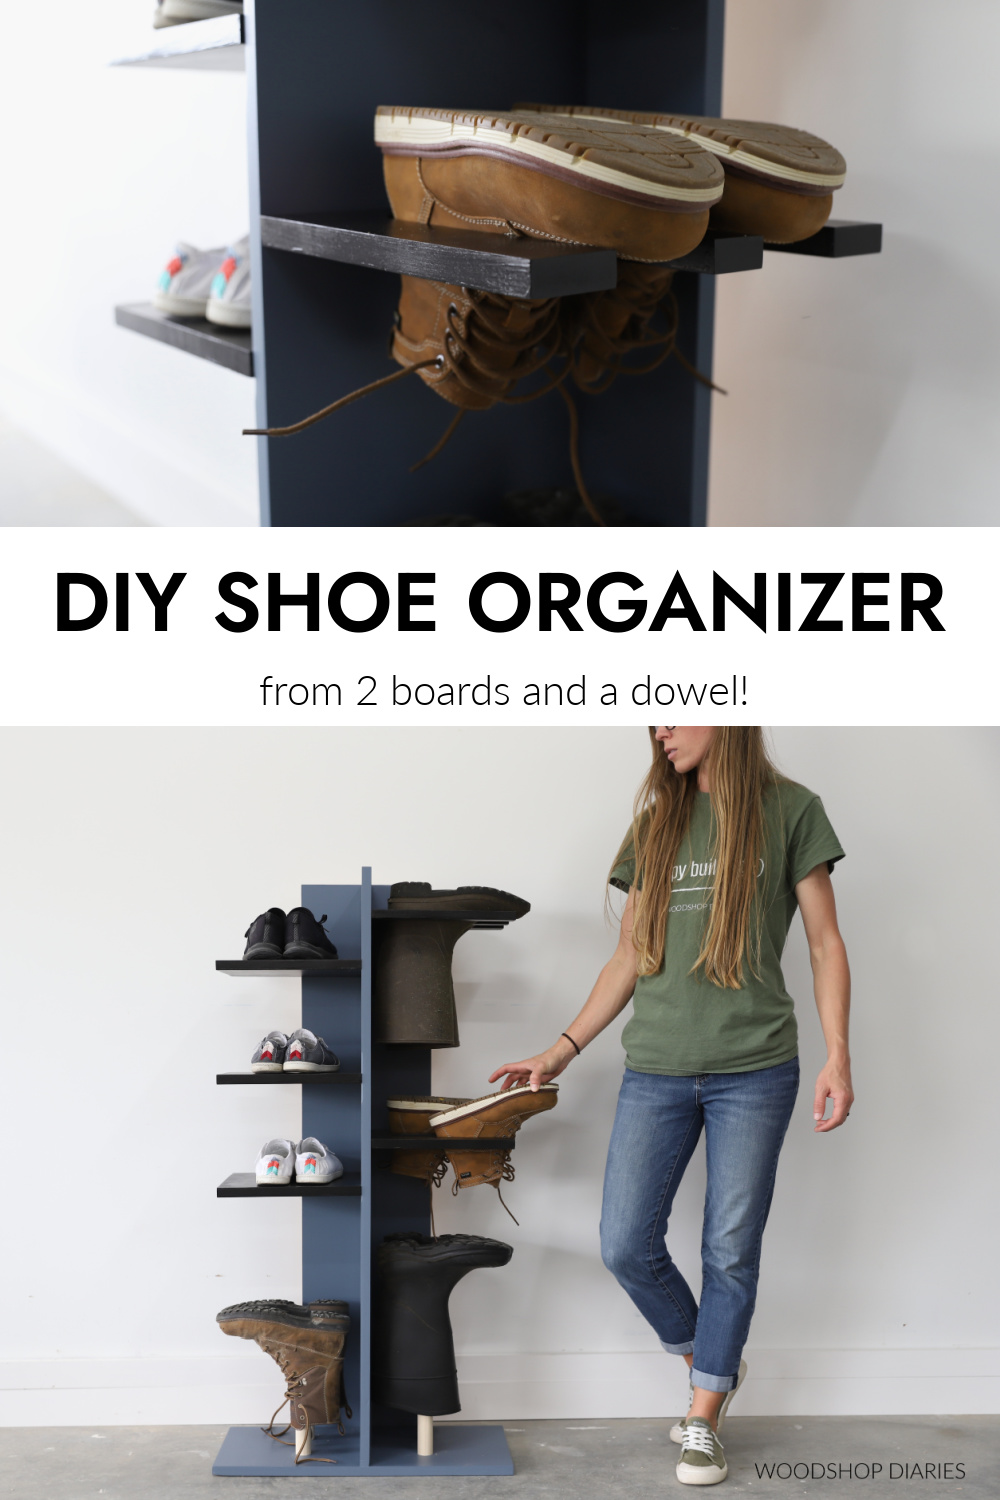 Pinterest collage image of shoe organizer showing close up of boots at top and Shara Woodshop Diaries placing shoes on shelf on bottom 